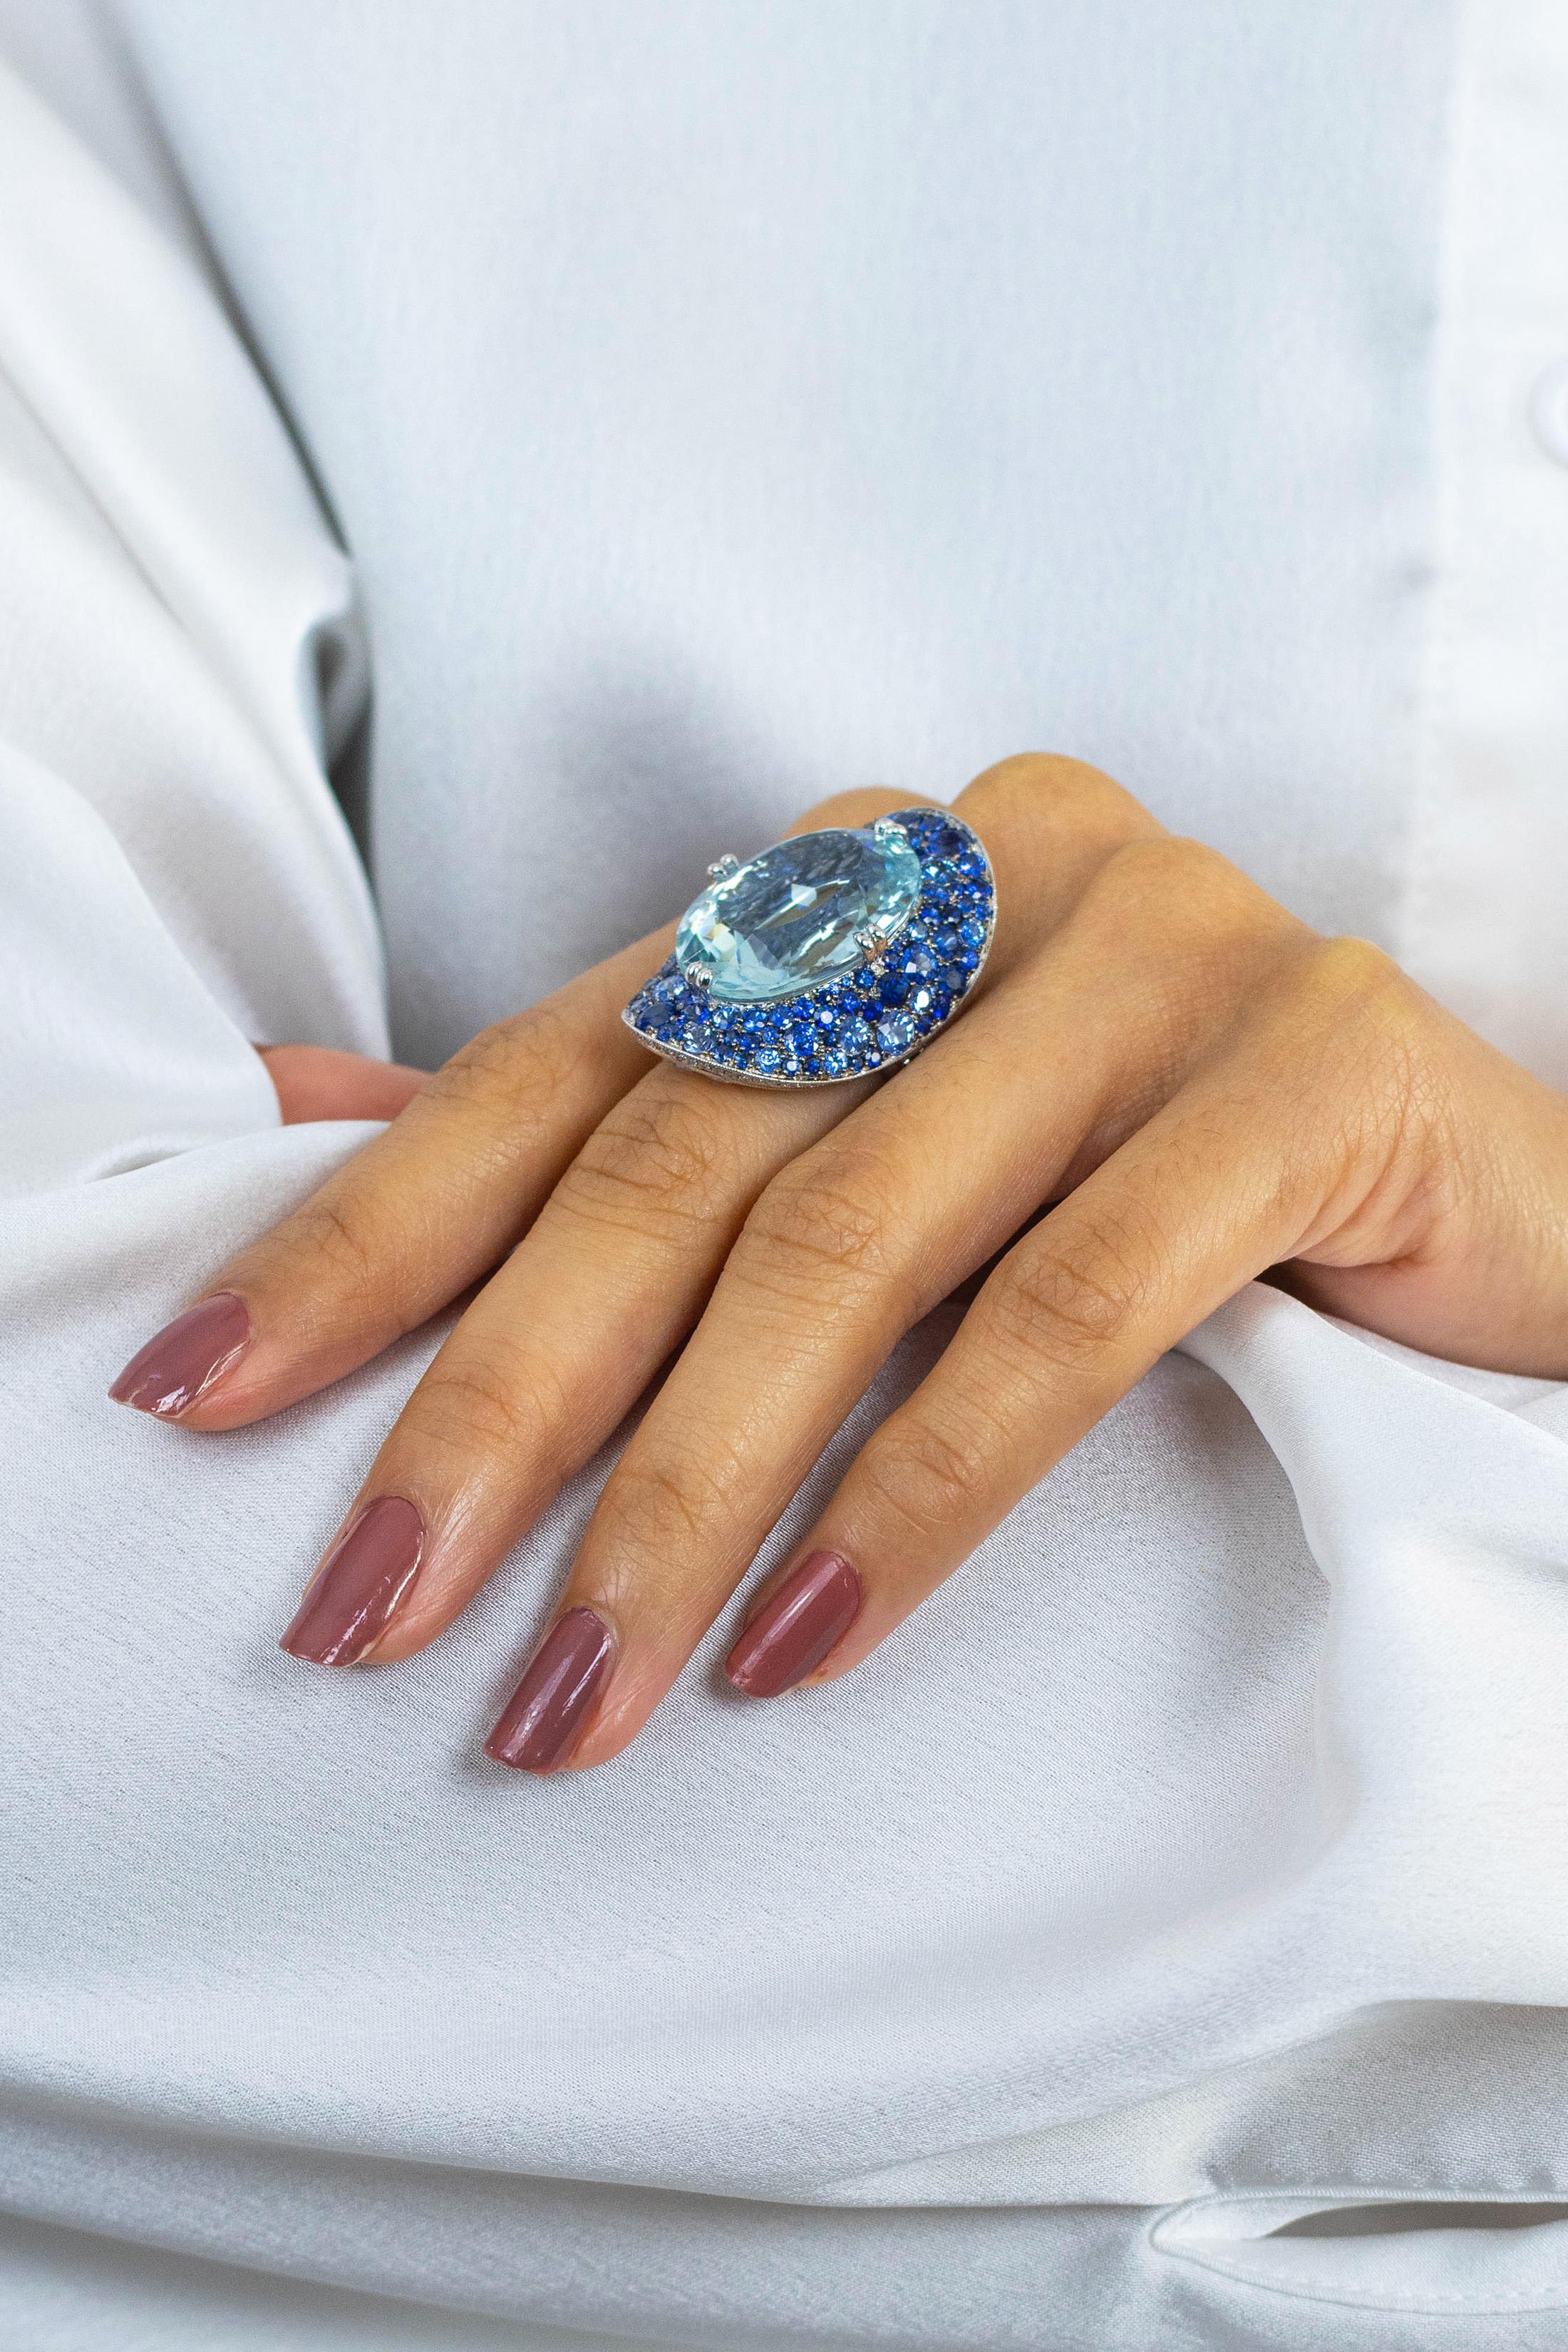 19.69 Carats Oval Cut Large Aquamarine with Sapphire and Diamond Bonnet Ring For Sale 2